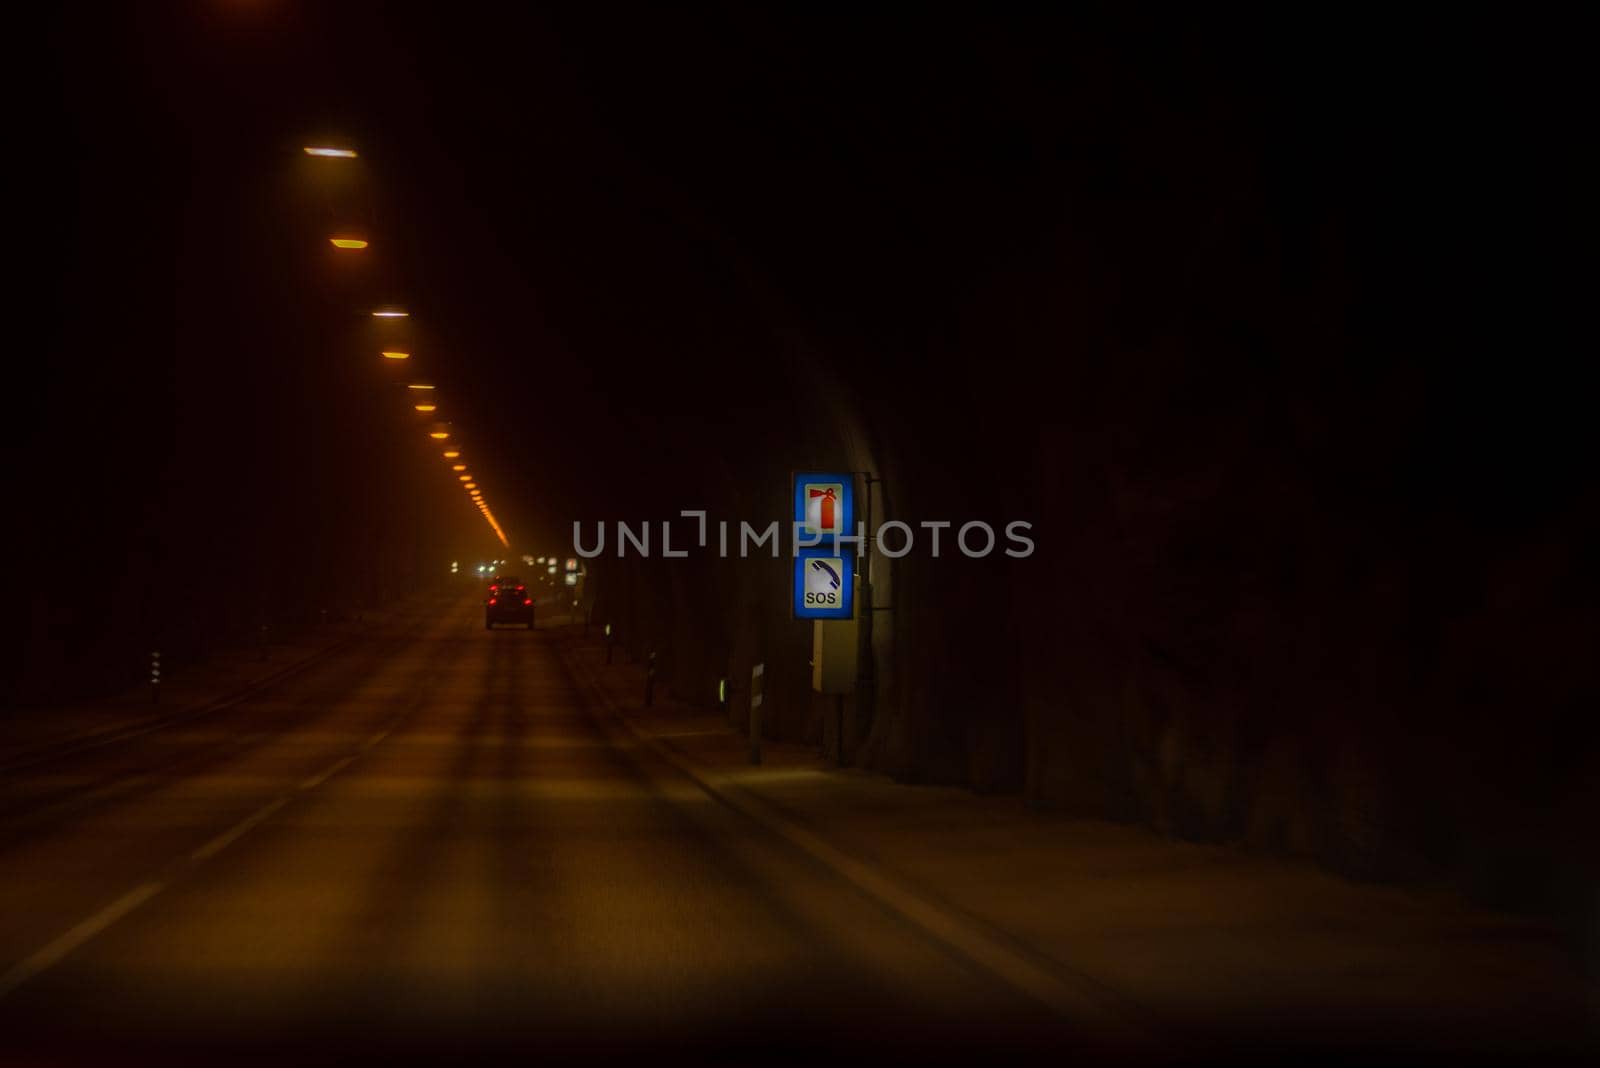 Dark underground tunnel long paved road with dim warm lighting and SOS signage